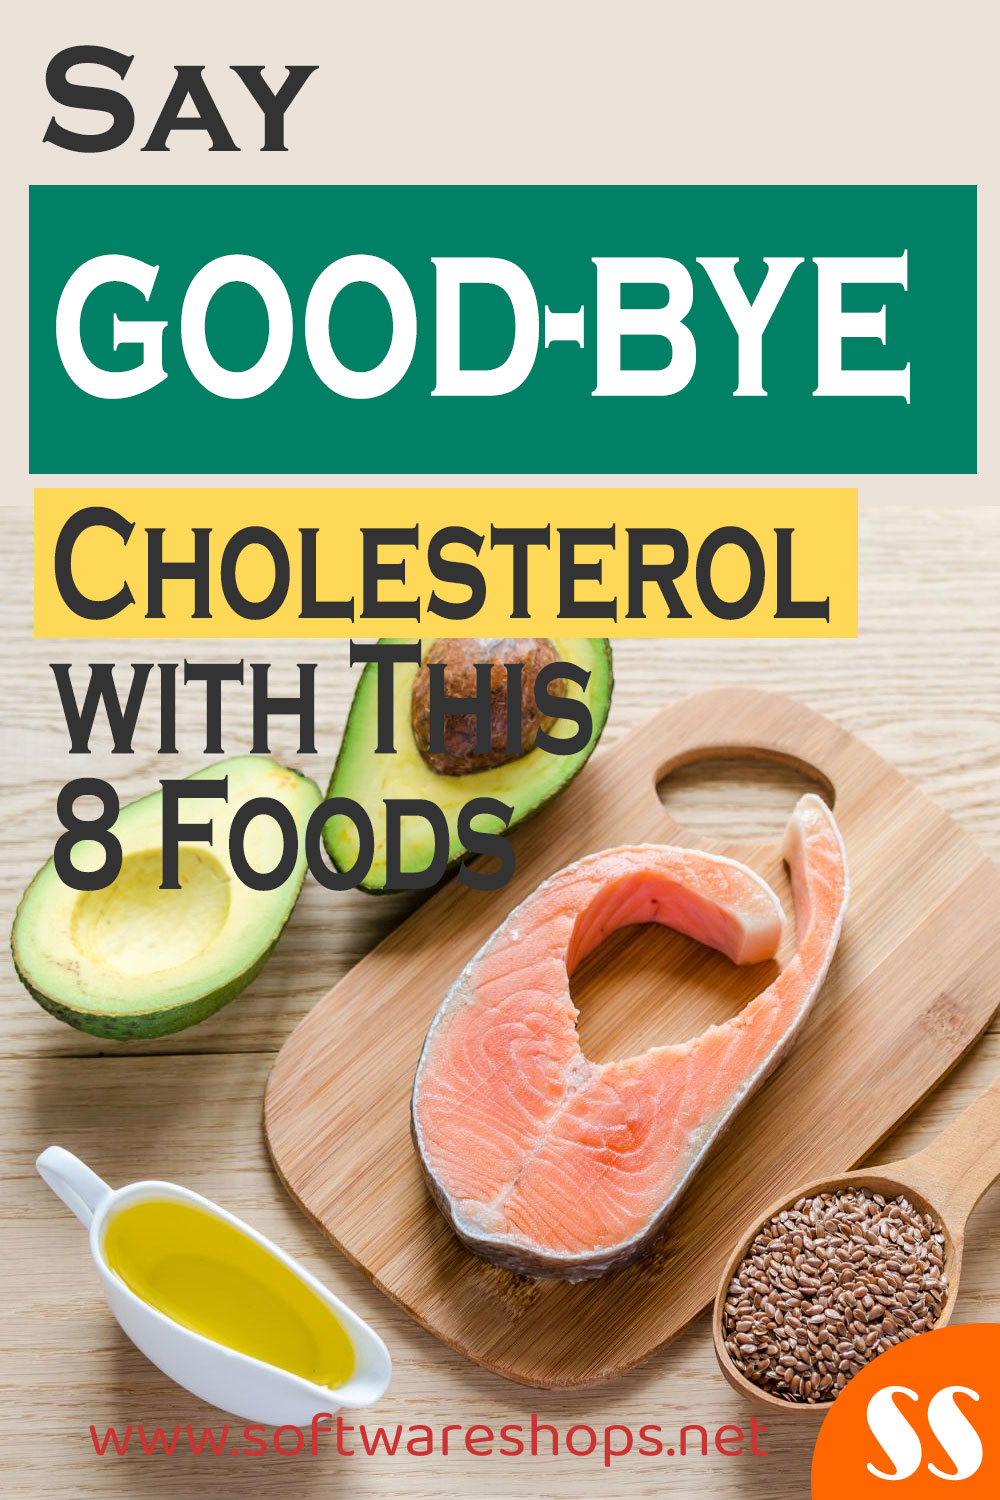 Say Goodbye Cholesterol With This 8 Foods